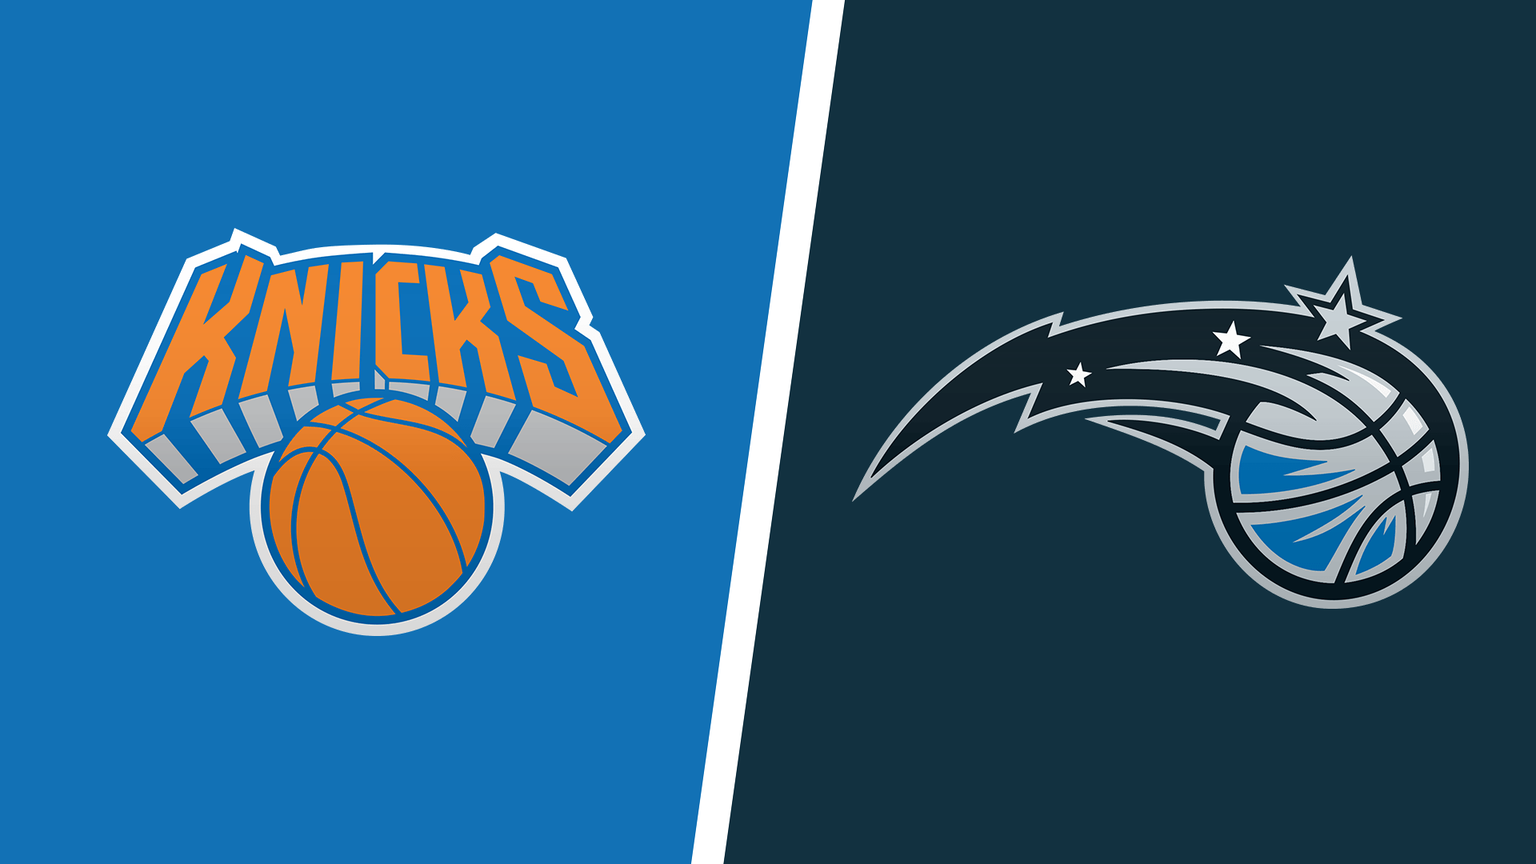 How to Watch Orlando Magic vs. New York Knicks Game Live Online on